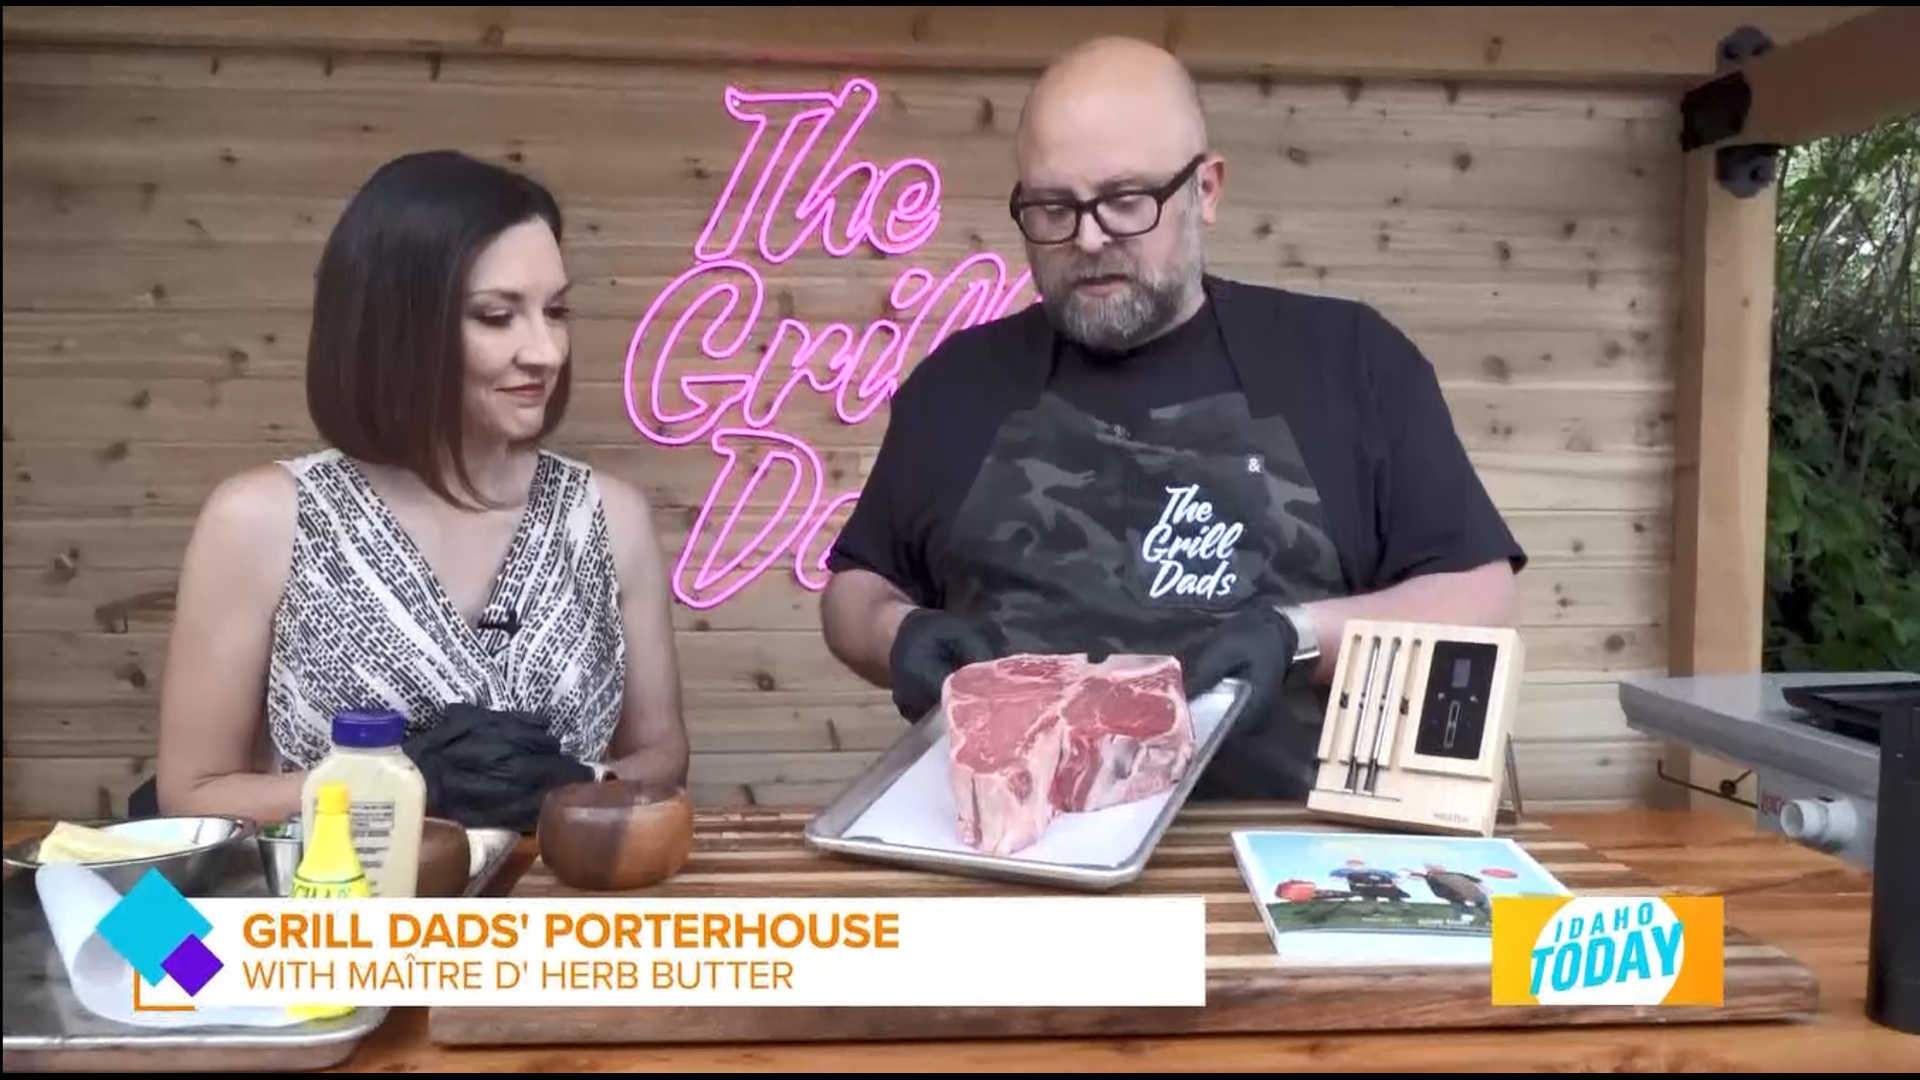 Mark Anderson, cohost of the Grill Dads shares outdoor grilling tips with Mellisa.